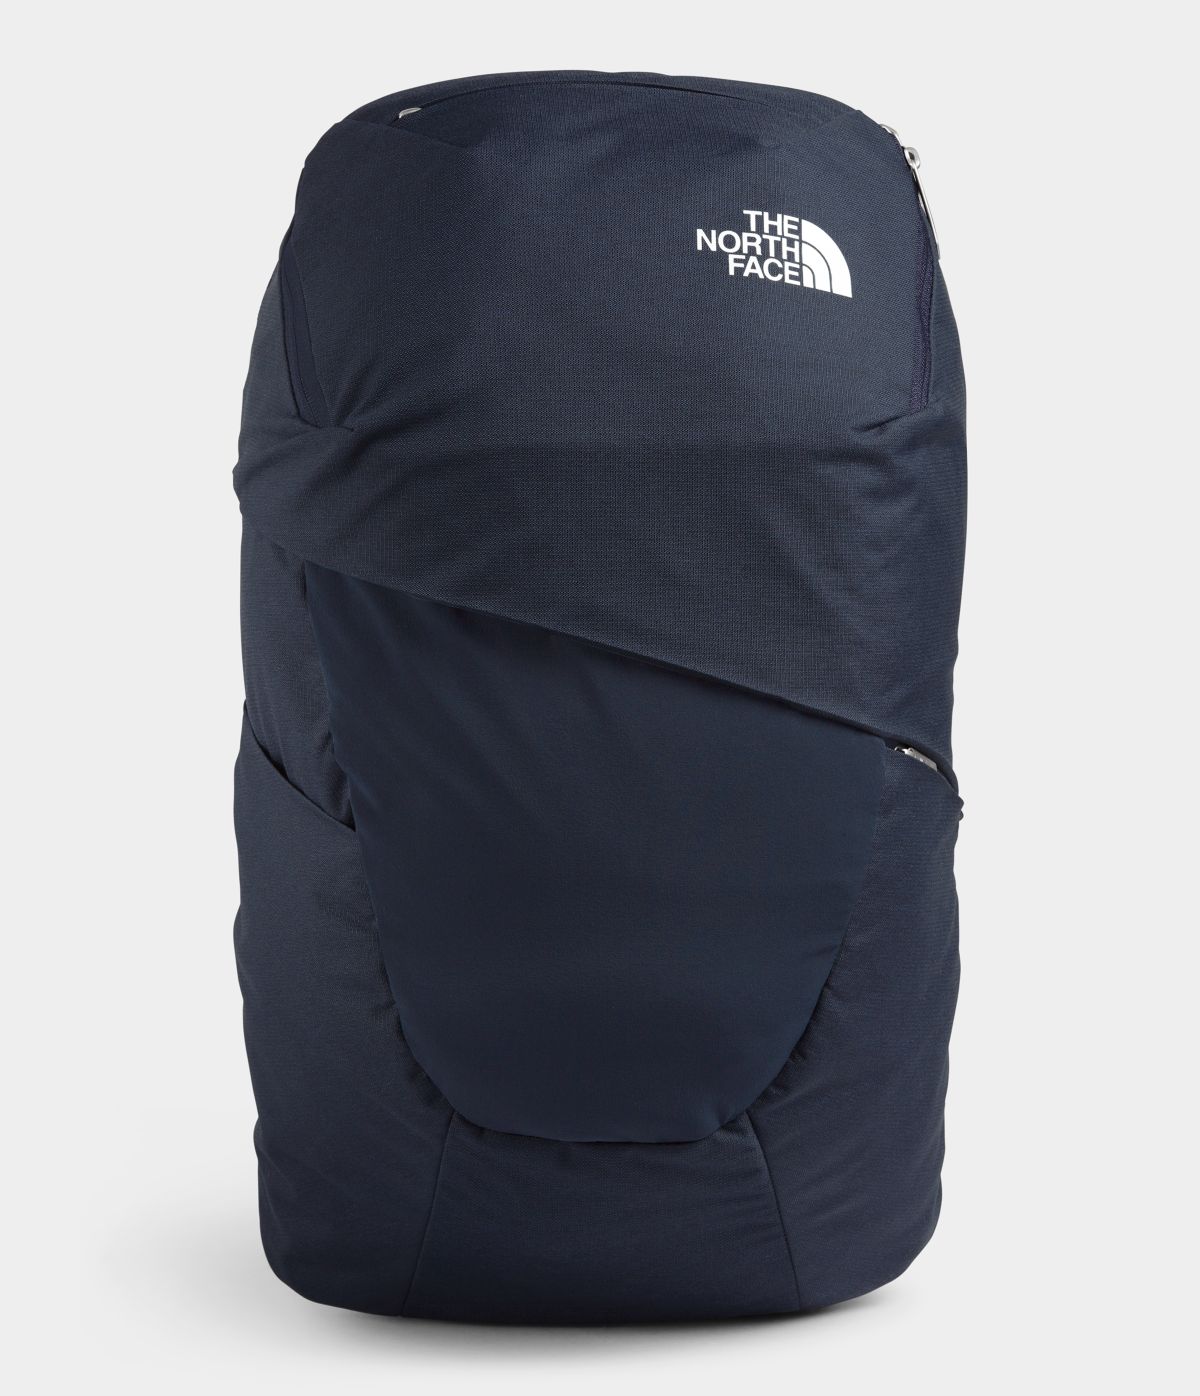 Women's The North Face Aurora Backpack in Aviator Navy Light Heather/TNF White from front view